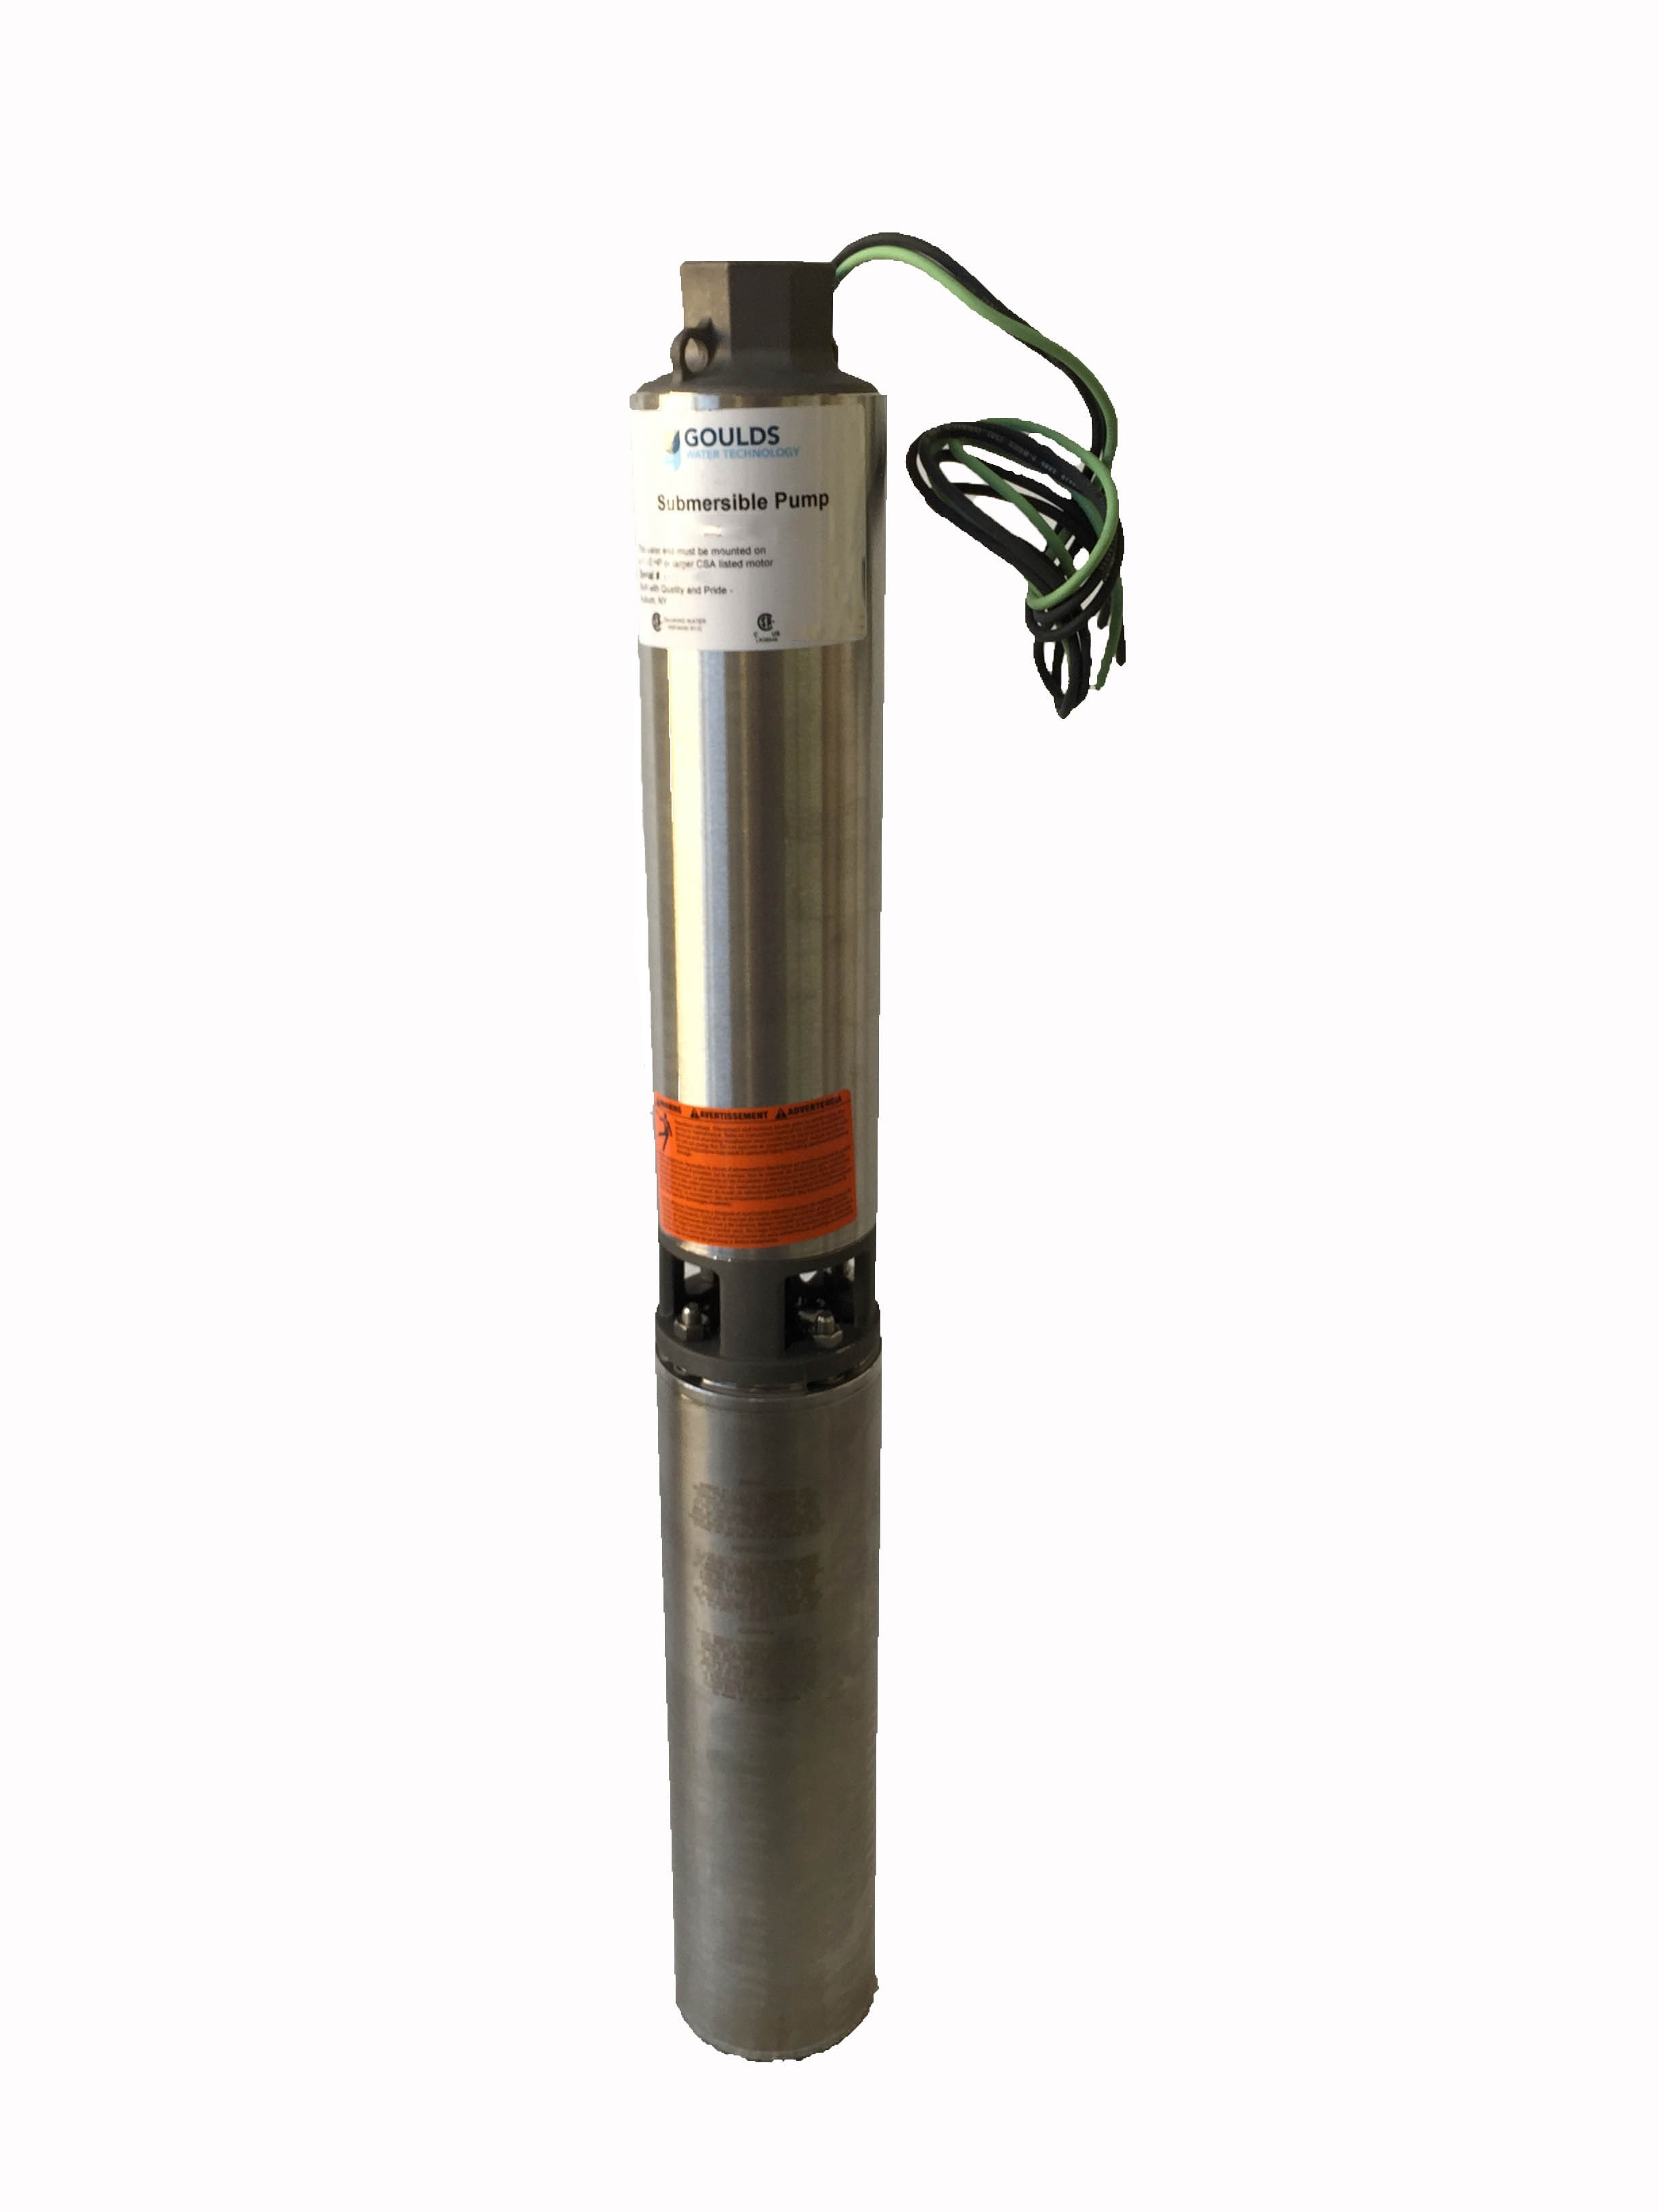 Goulds 13GS10422C 13GPM 1HP 230V 2 Wire Submersible Well pump